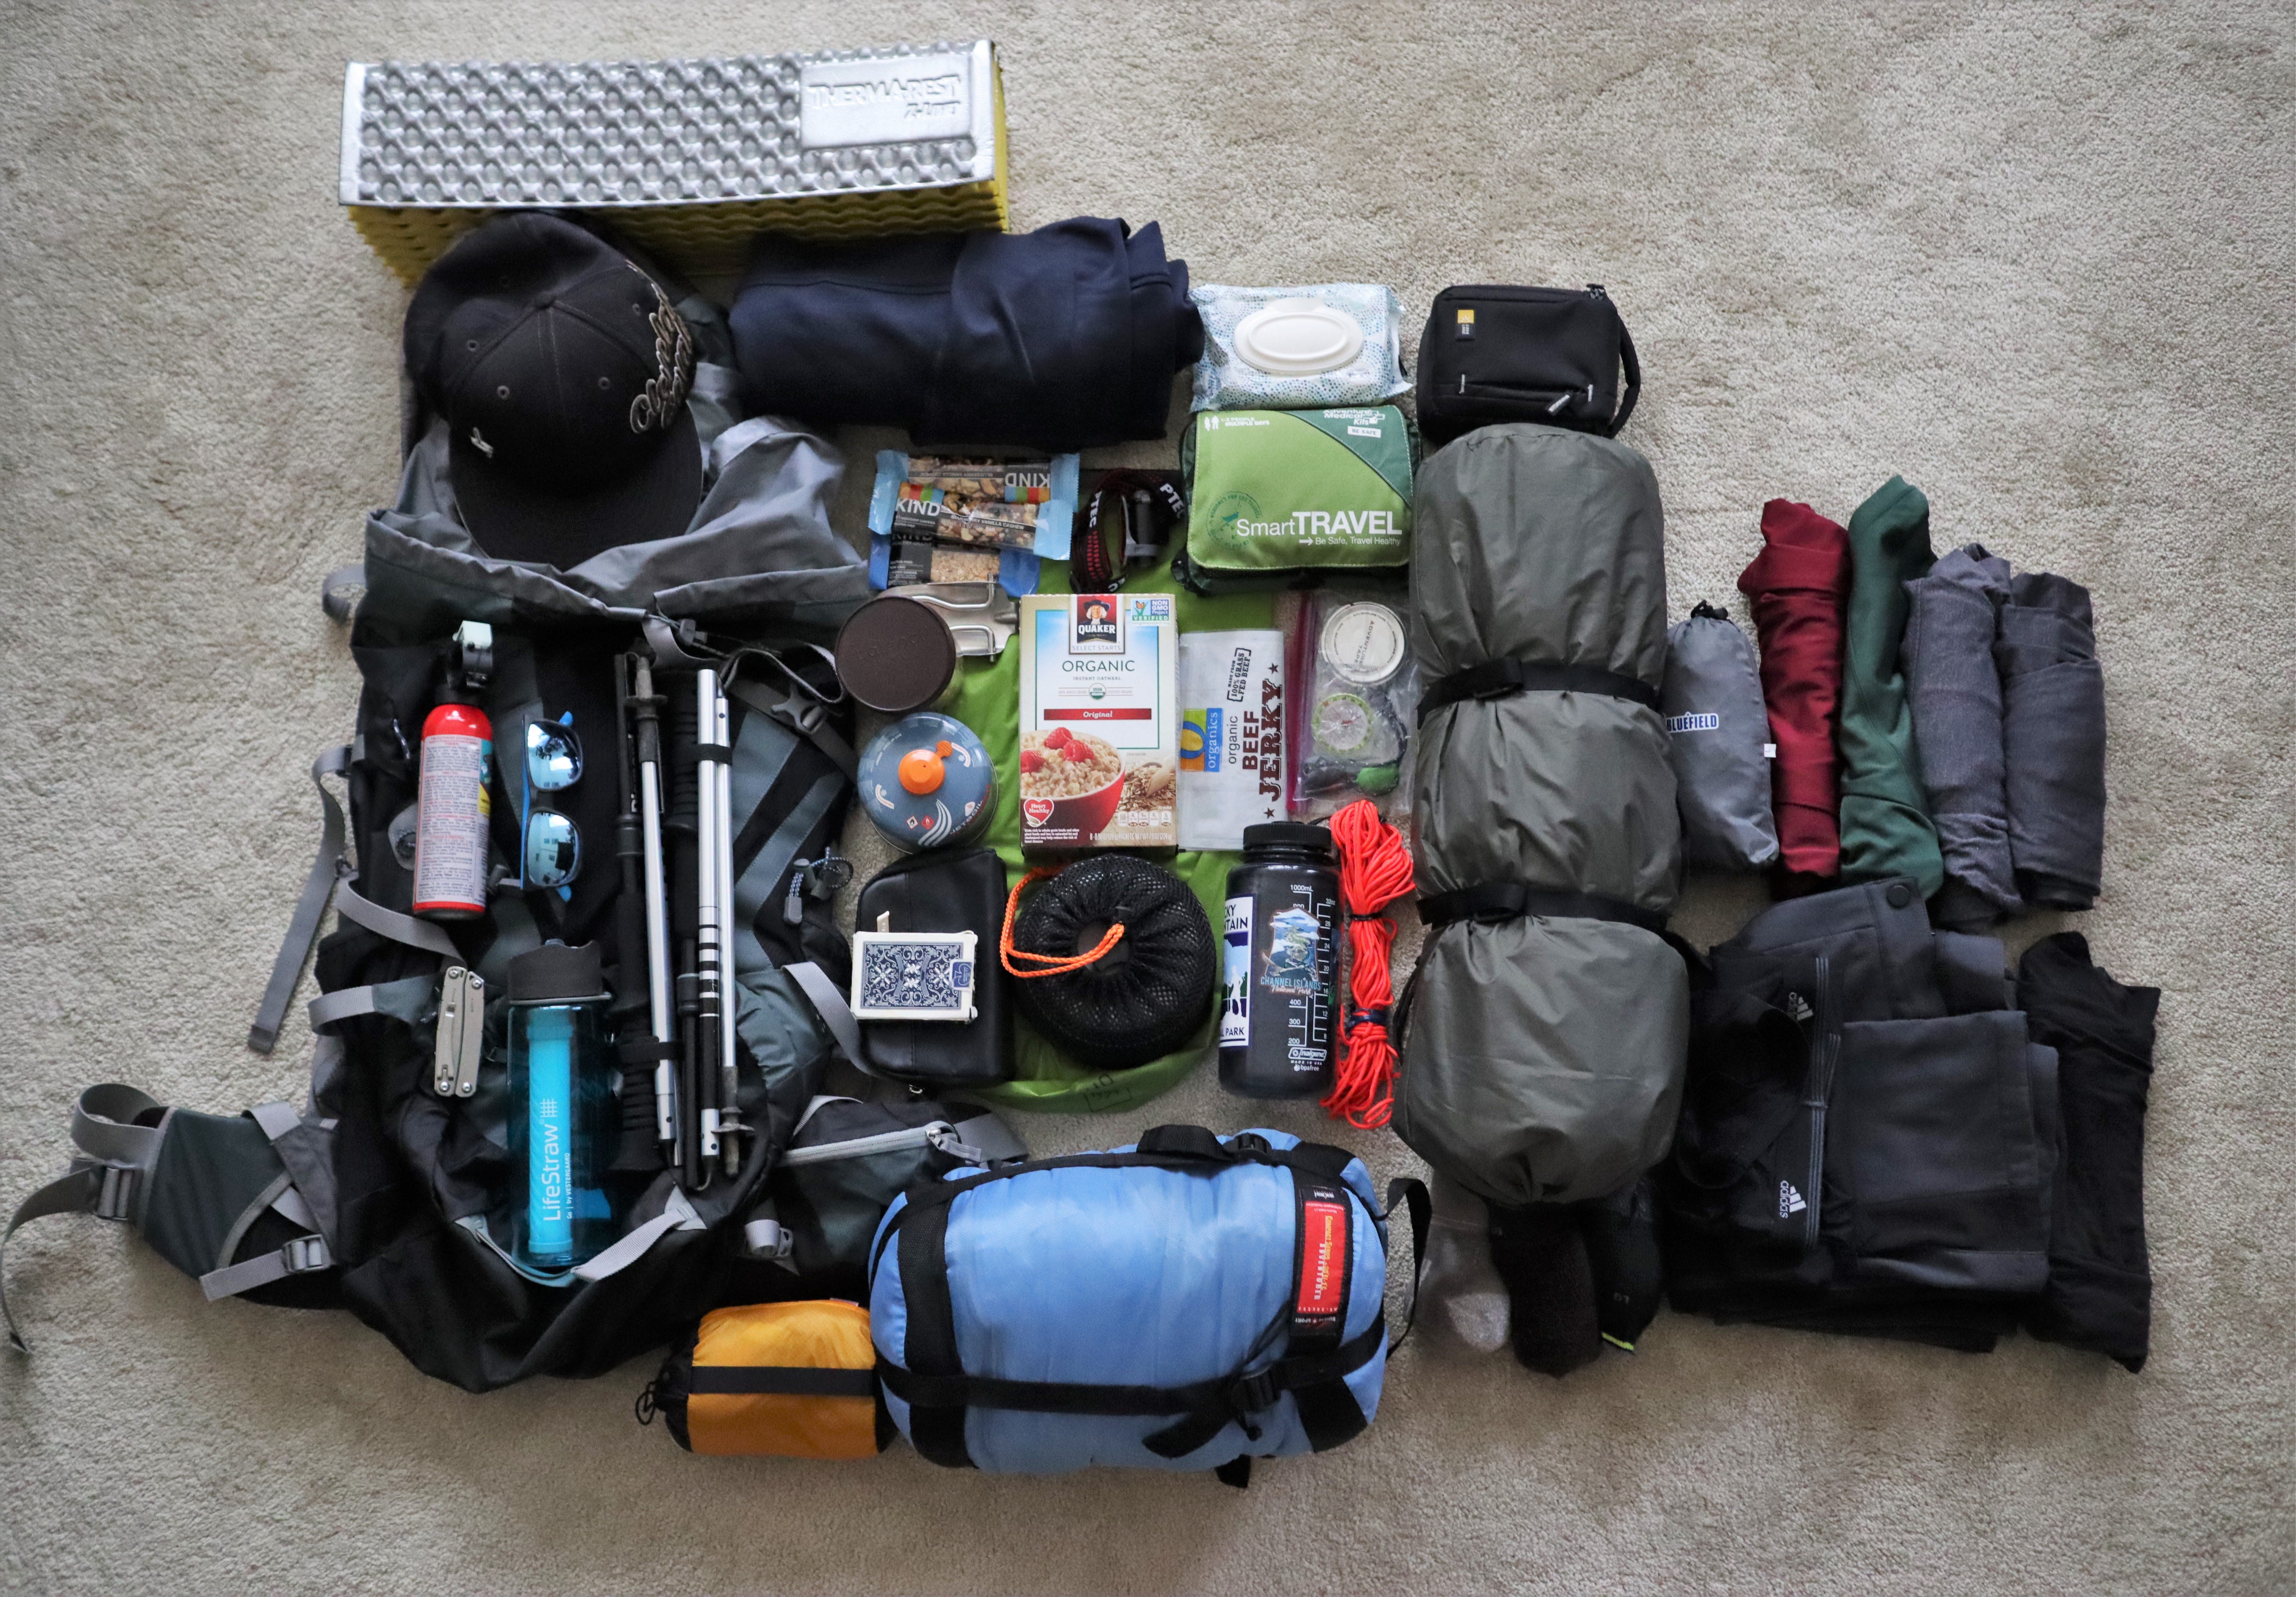 The Definitive Guide that You Never Wanted: Packing Your Backpack